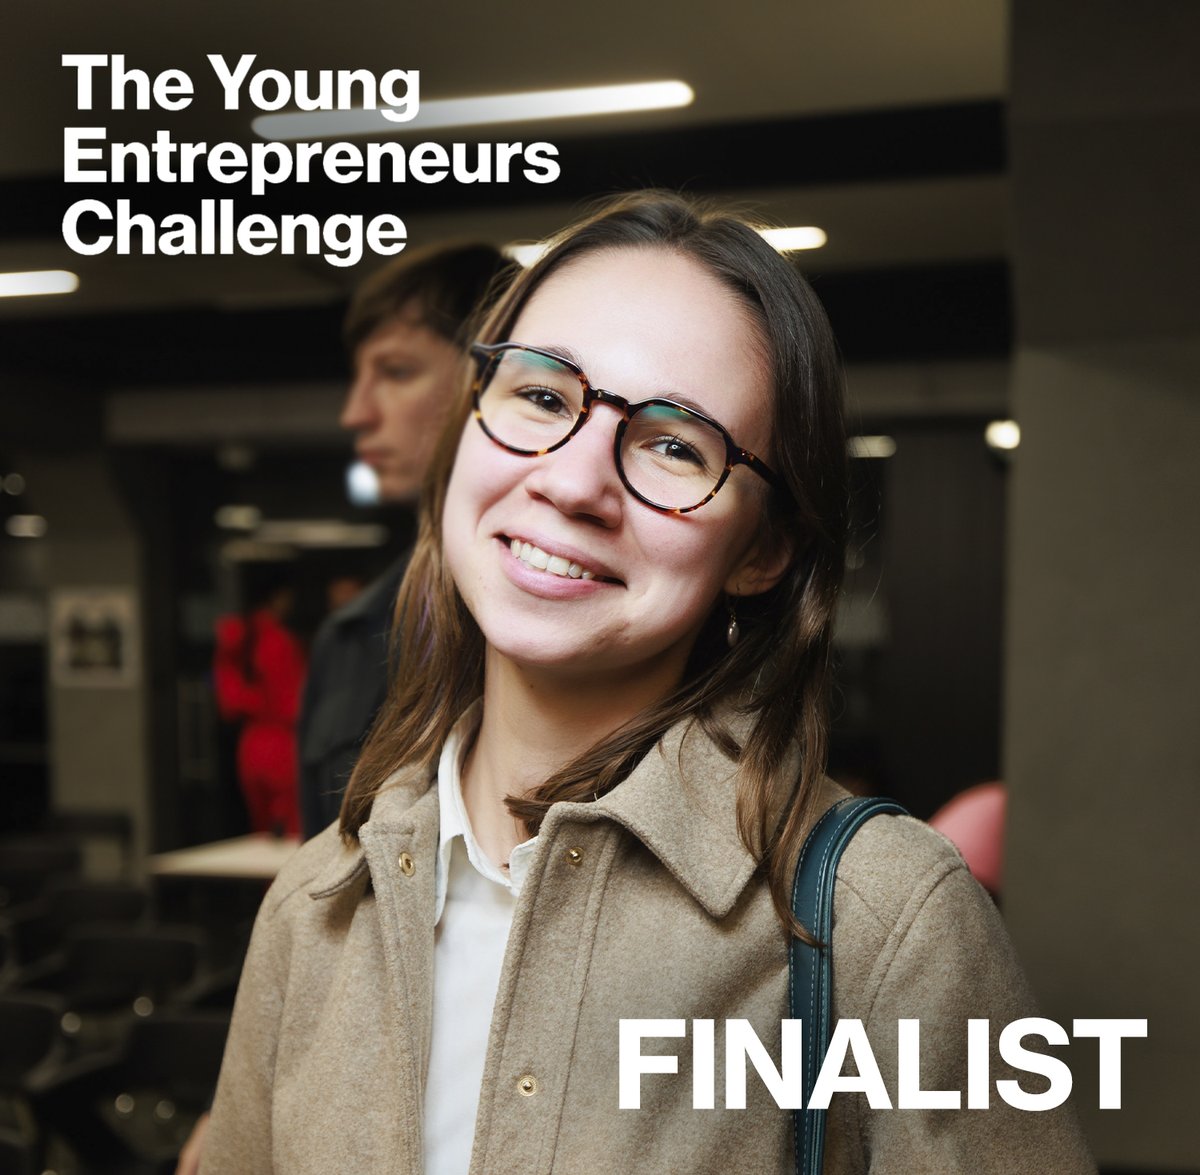 Today's #Finalist is Mariia Alipatova, her company, Solar Optics uses #sun tracking #tech to reduce #power consumption & #carbon #emissions.​ Will Mariia be our Grand #Prize #Winner? Join the #livestream on Thursday here: lnkd.in/euc99FjH #YEC24 @VerizonBusiness @unloc_uk